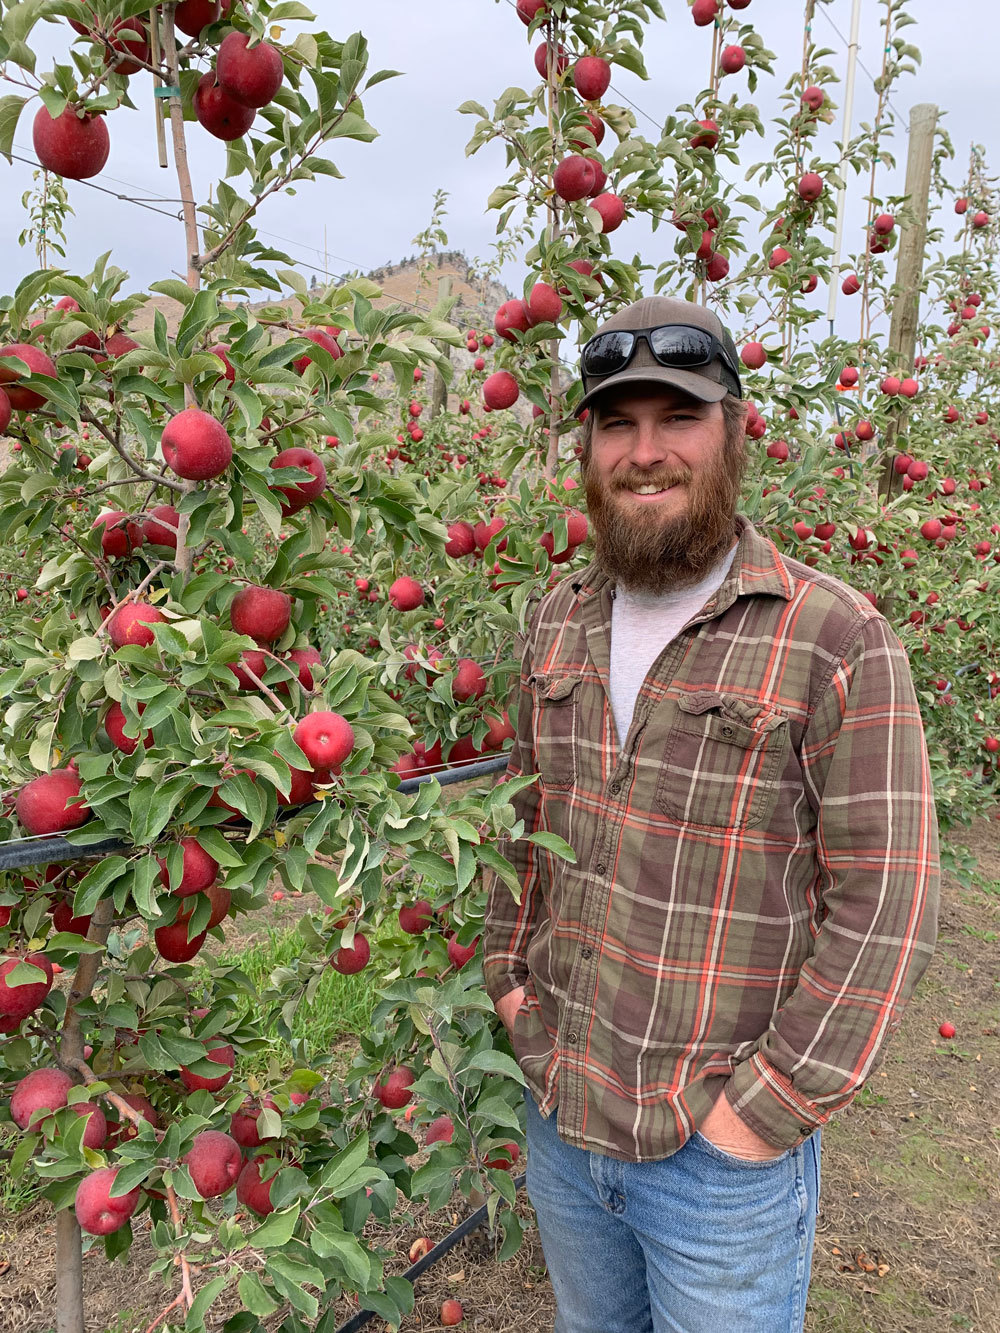 A man stands in front of a row of apples growing on a tree